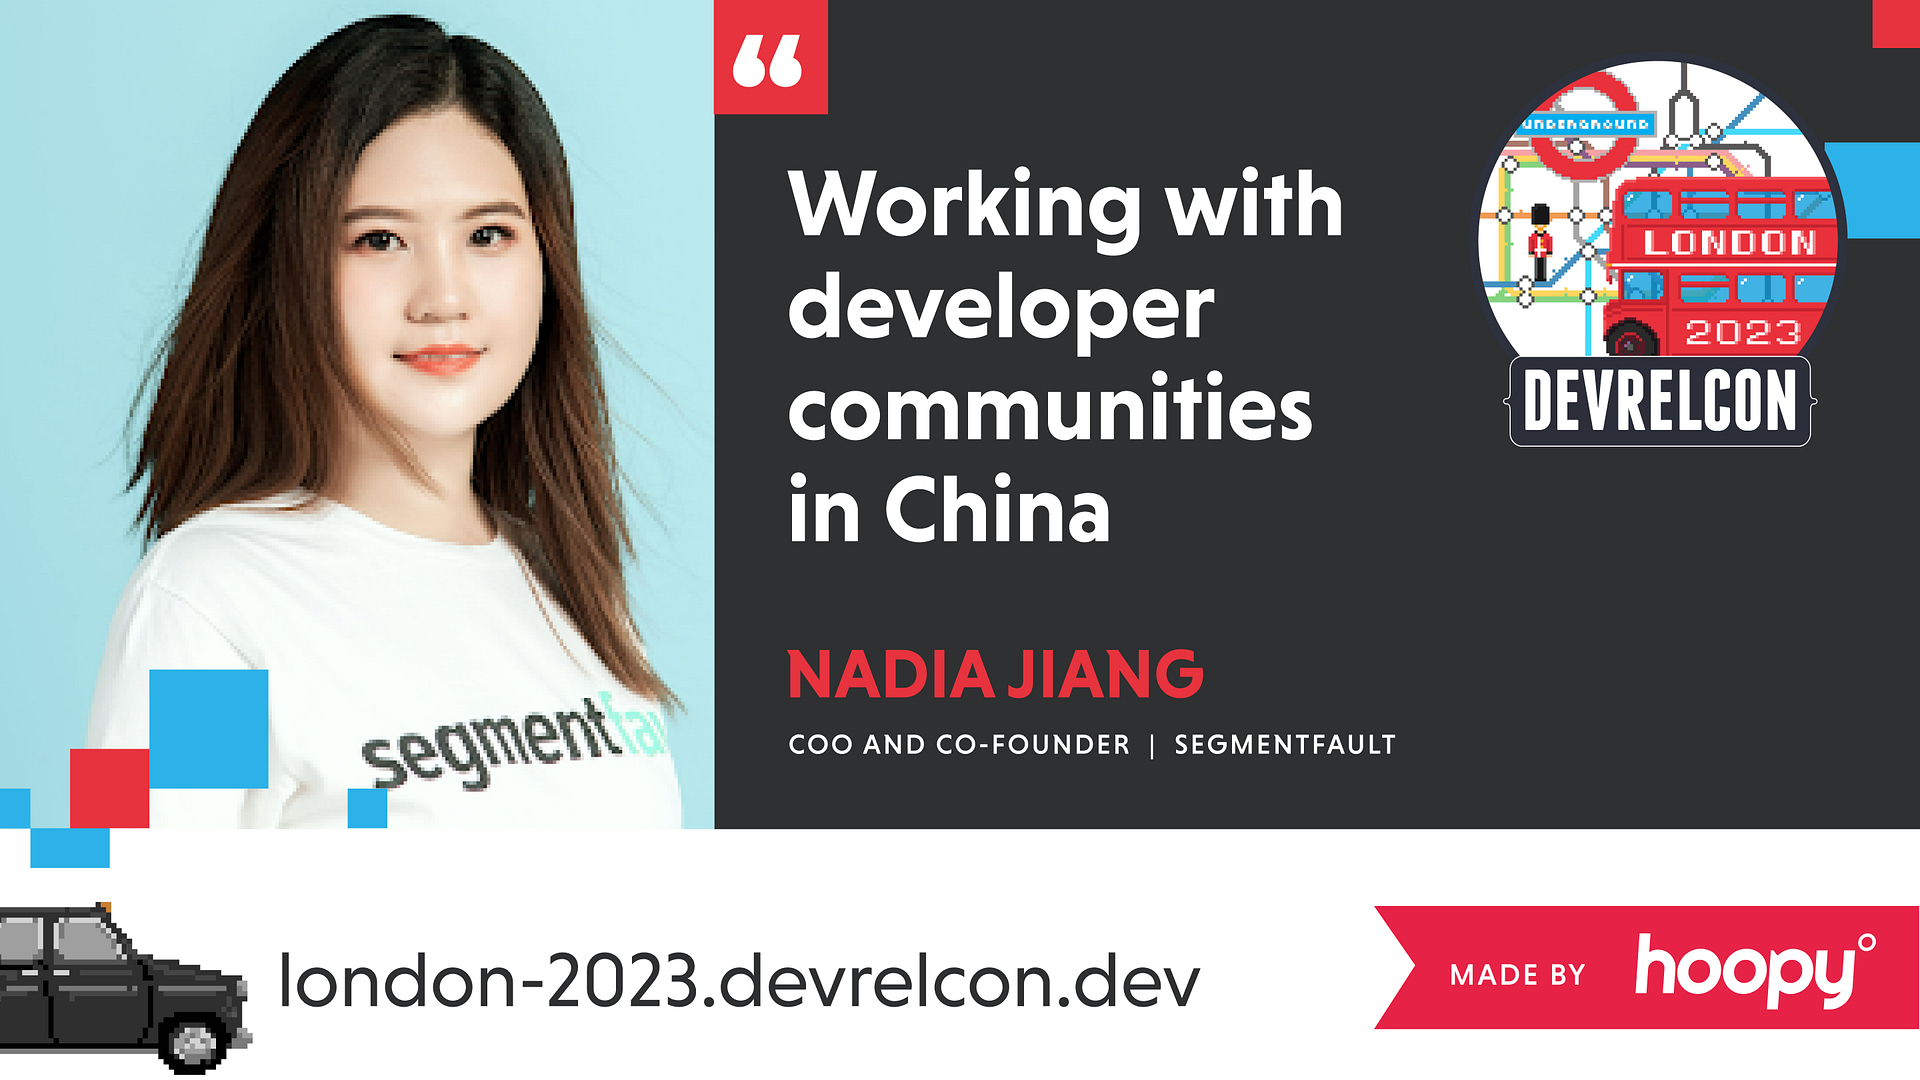 The image is a promotional banner for a conference presentation. It features a woman with long hair named Nadia Jiang, who is the COO and co-founder of SegmentFault. She is set to speak about "Working with developer communities in China" at an event called DEVRELCON in London, 2023. The background includes a London Underground sign, a double-decker bus, and the event's website address, london-2023.devrelcon.dev. The banner also indicates that the graphic was made by Hoopy. There's a playful addition of a black cab at the bottom left corner, further emphasizing the London theme.